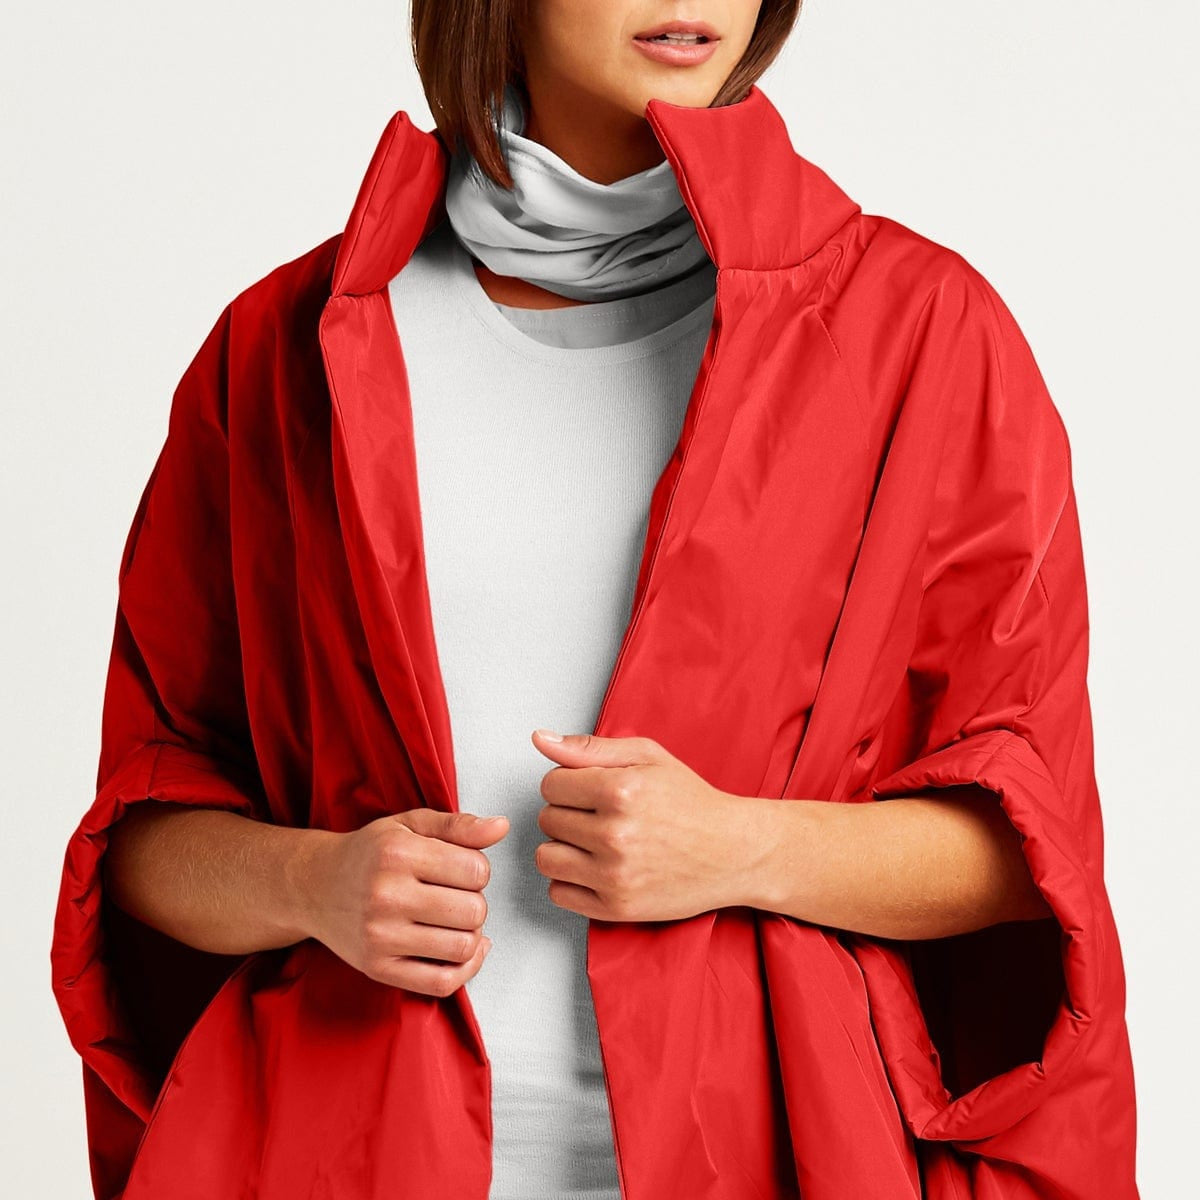 Planet by Lauren G Women's Poncho/Topper O/S / Cherry Planet by Lauren G Chic Cape